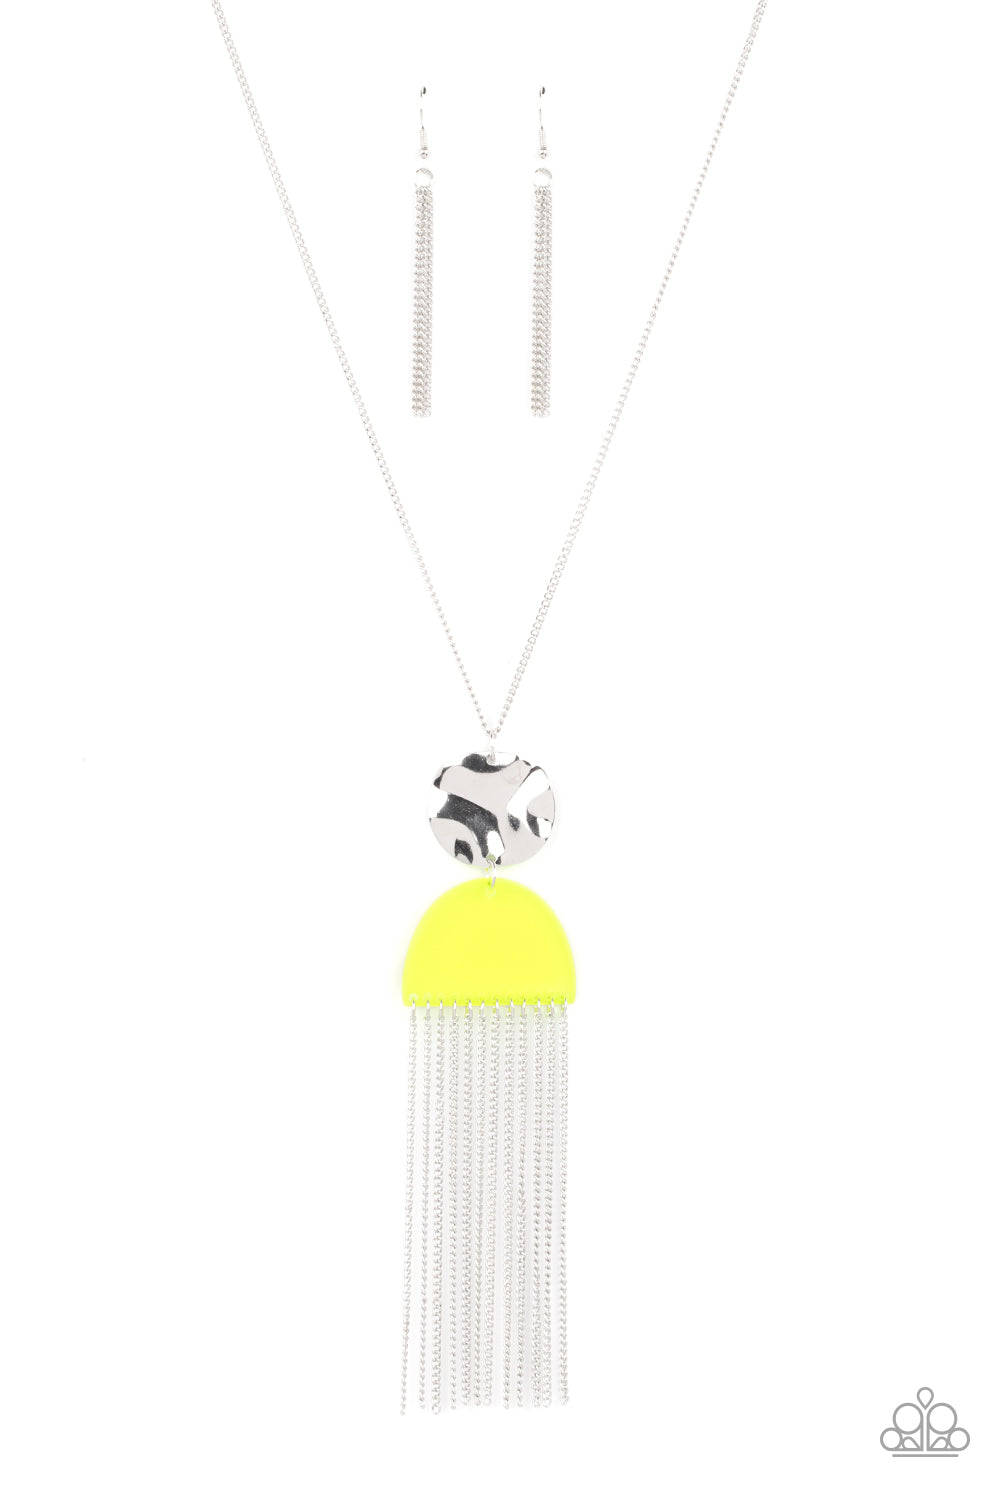 Color Me Neon Necklace__Yellow